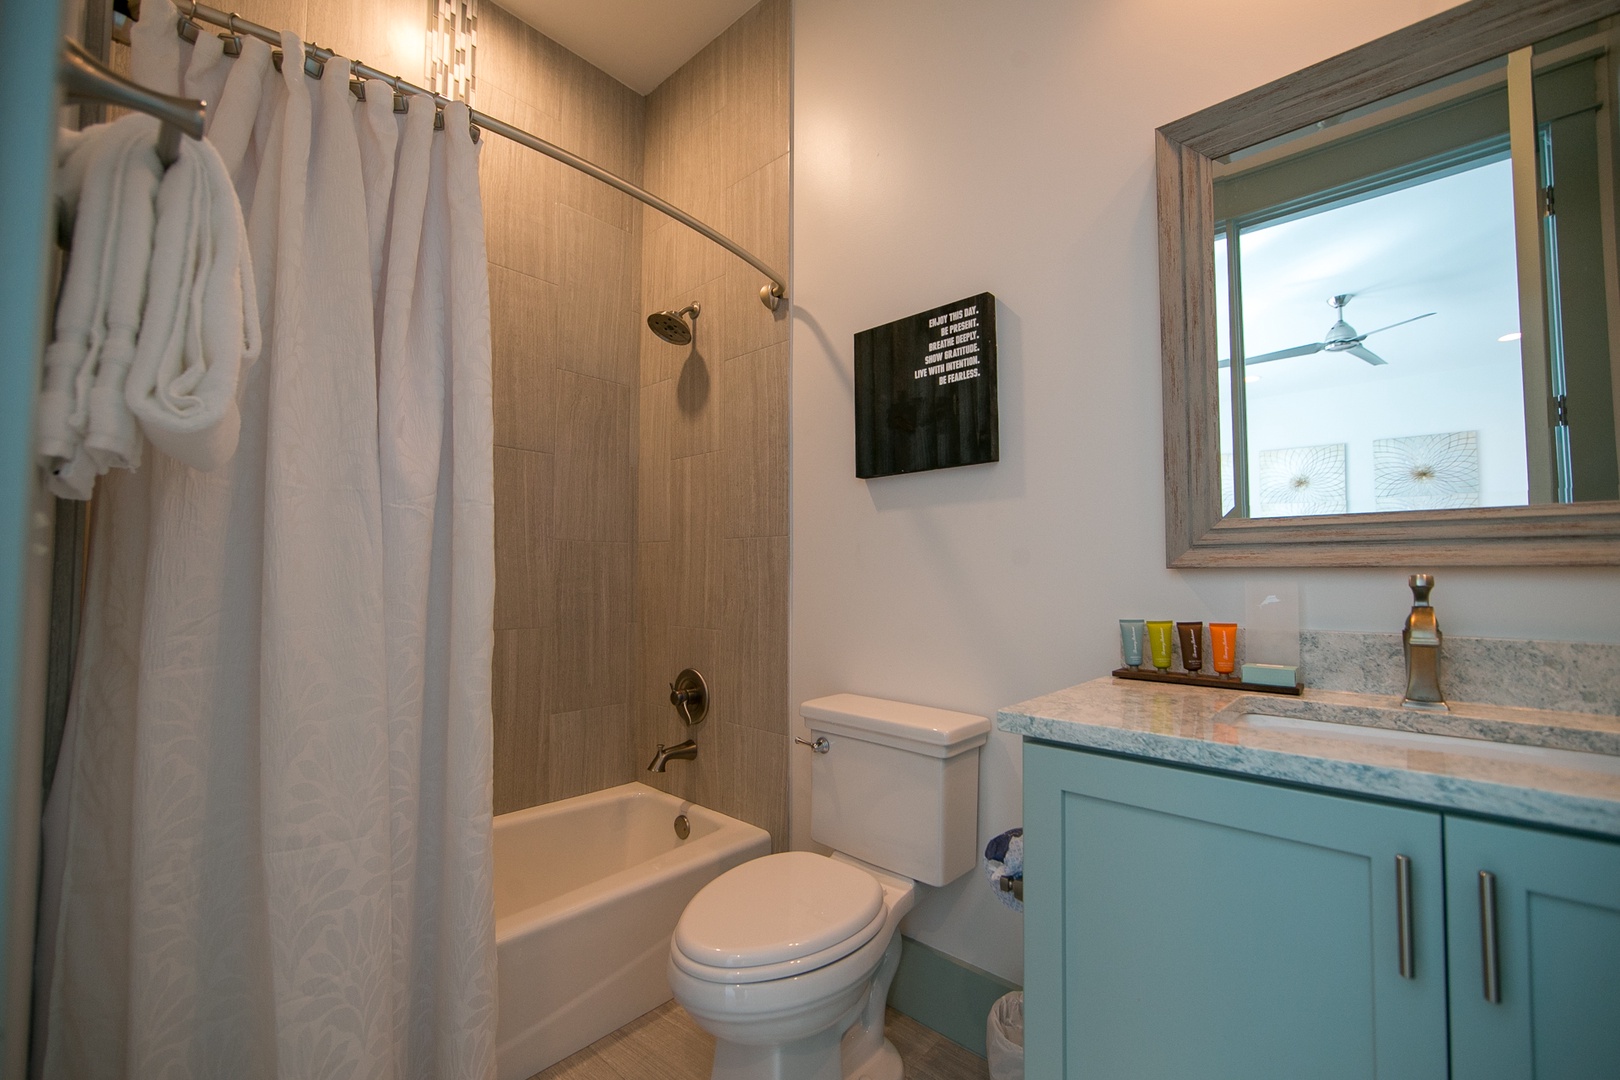 Each full bedroom features it's own beautifully appointed private bathroom (with the exception of the day bed room).